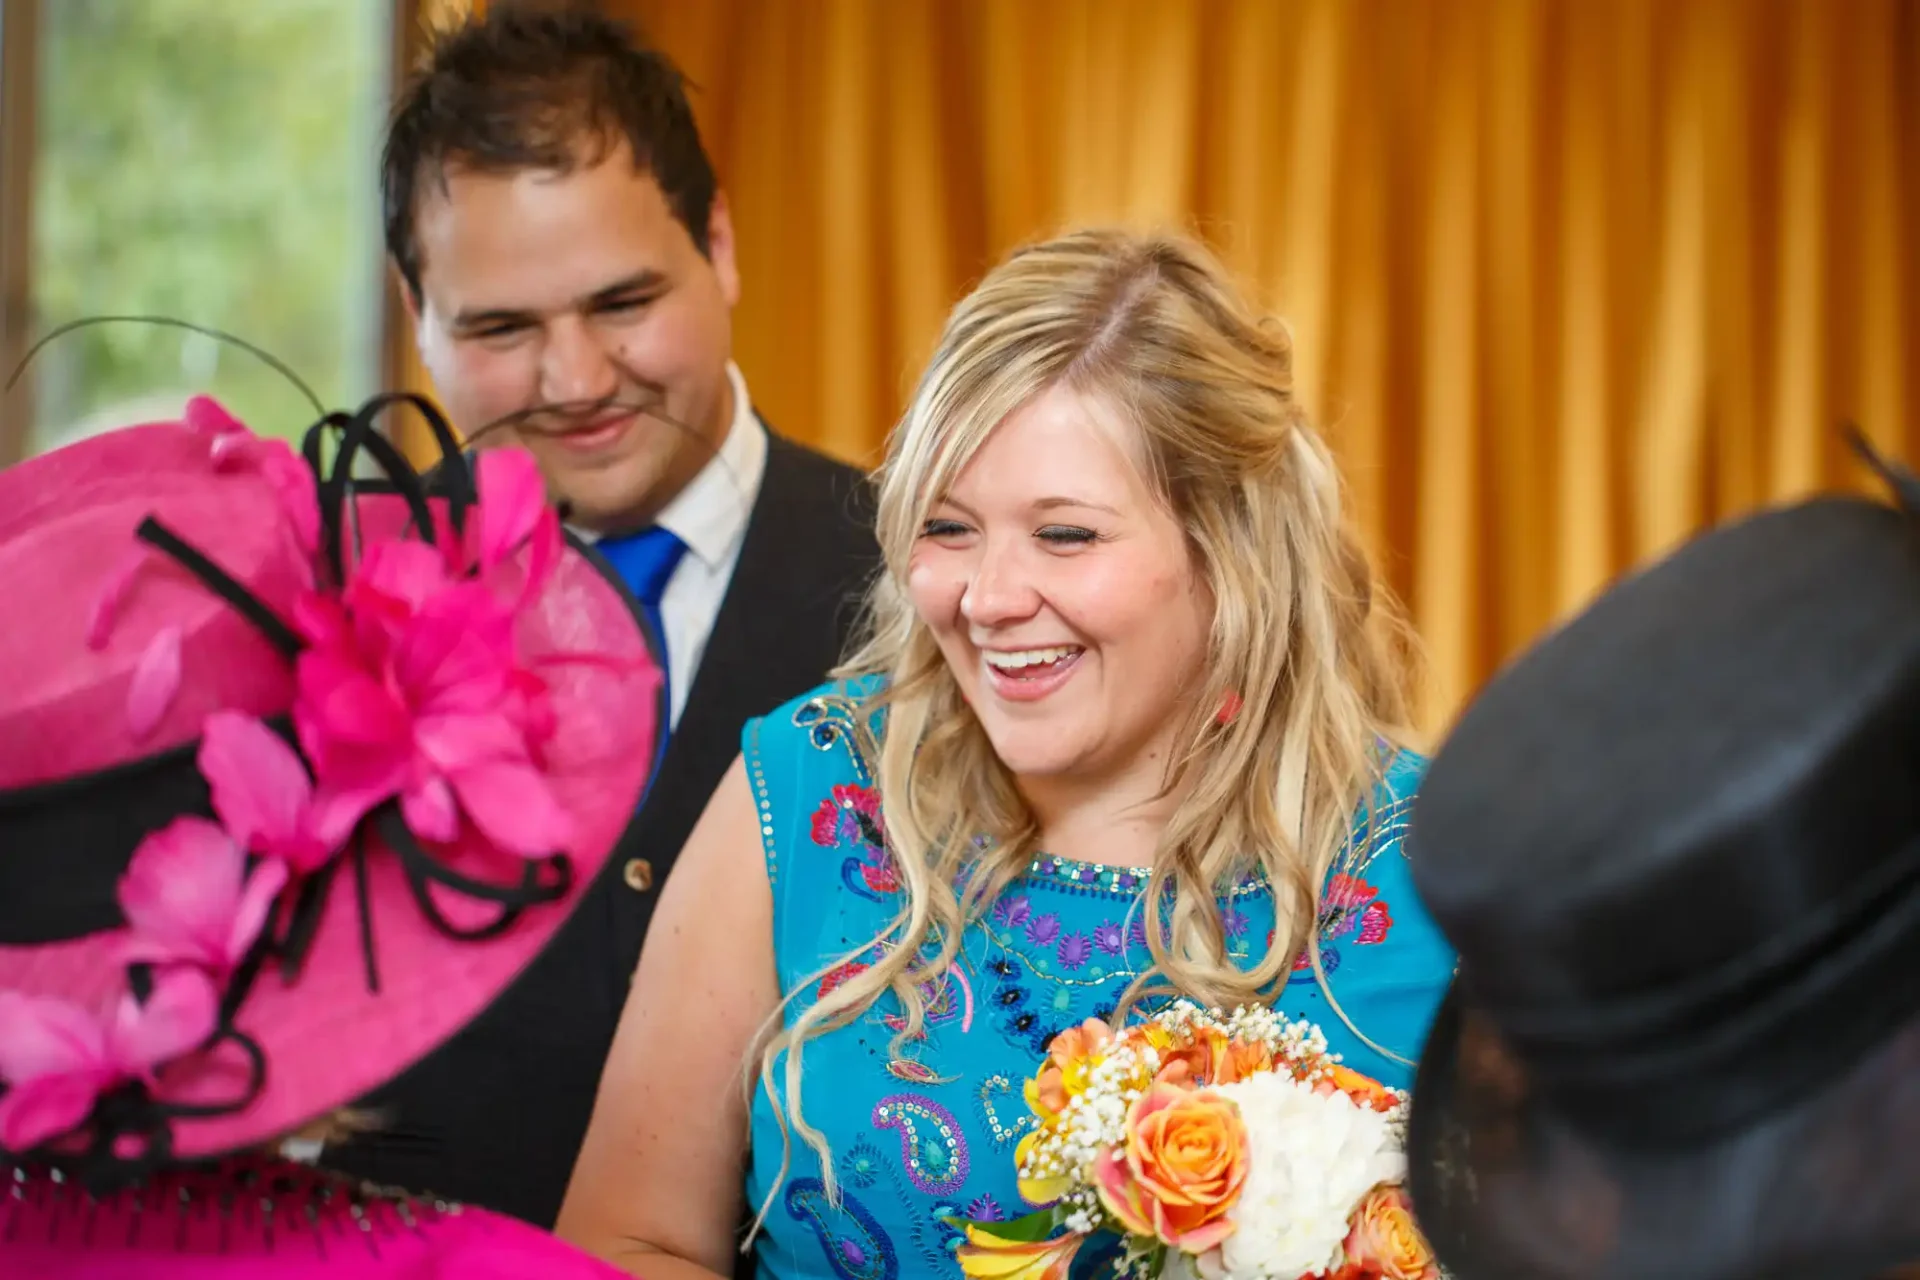 A woman in a blue dress laughs joyfully, holding flowers, with a man smiling in the background at a festive event.